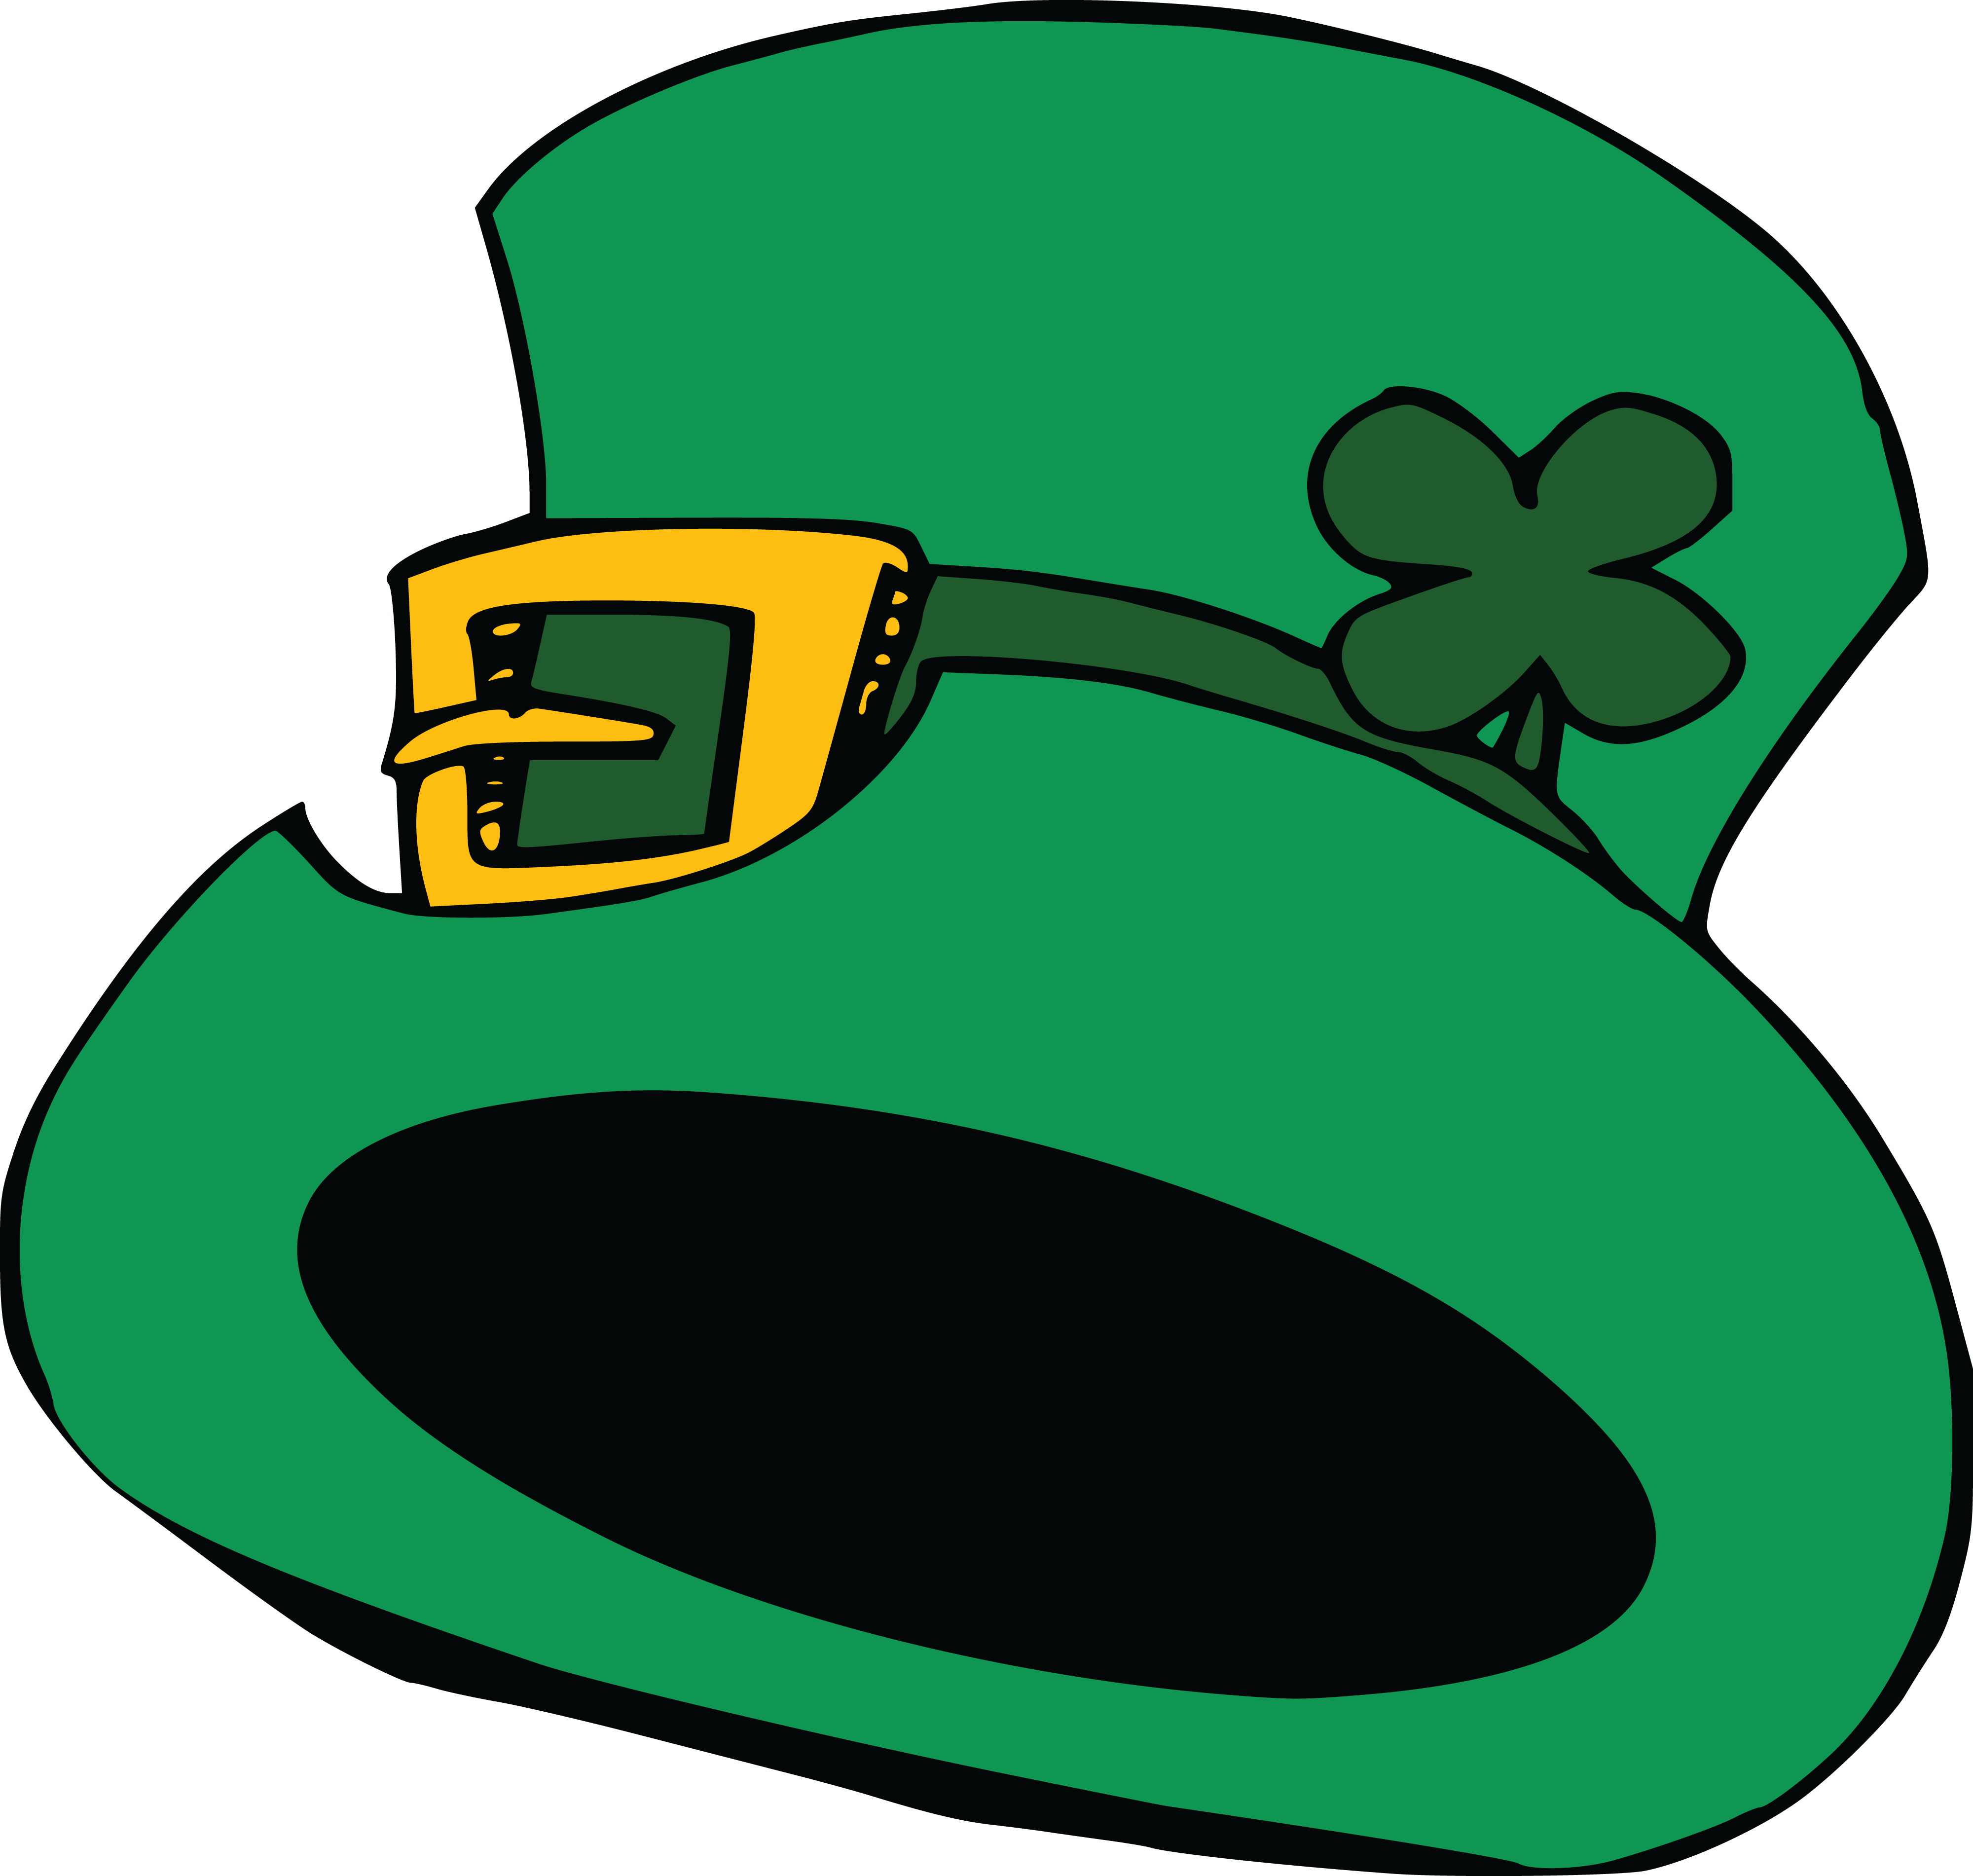 Download Free Clipart Of A St Patricks Day Leprechaun Hat